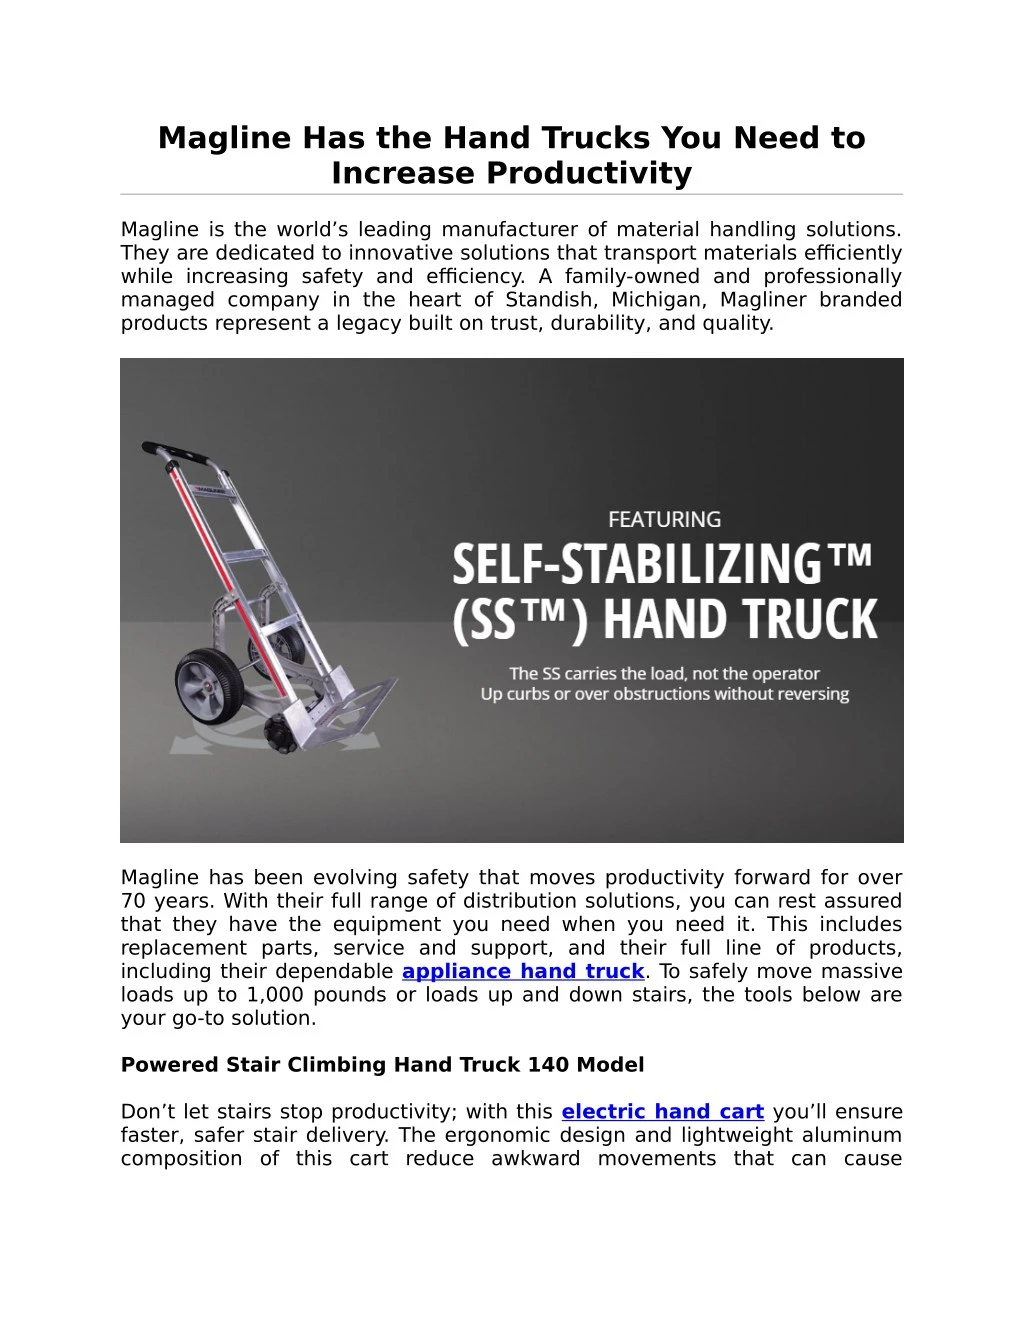 magline has the hand trucks you need to increase